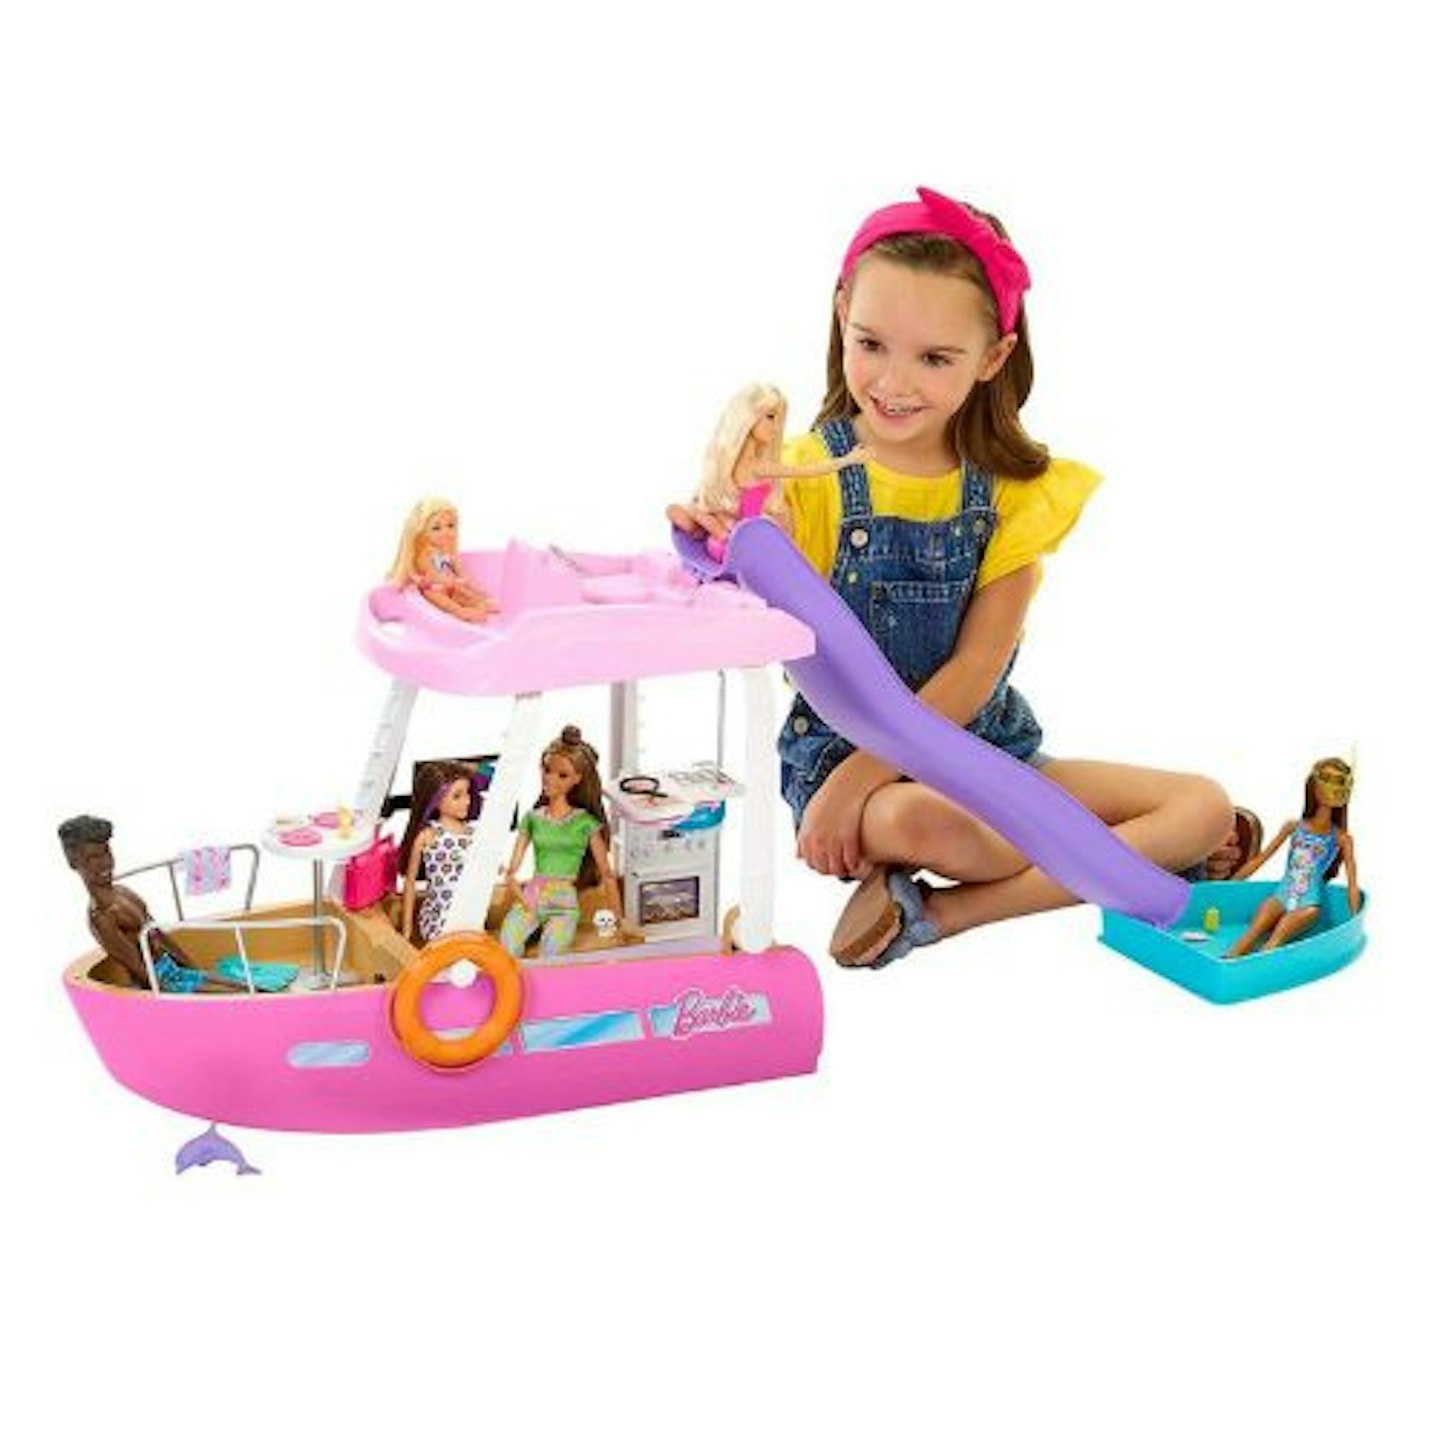 Best toys for 5 year olds Barbie Dream Boat Playset